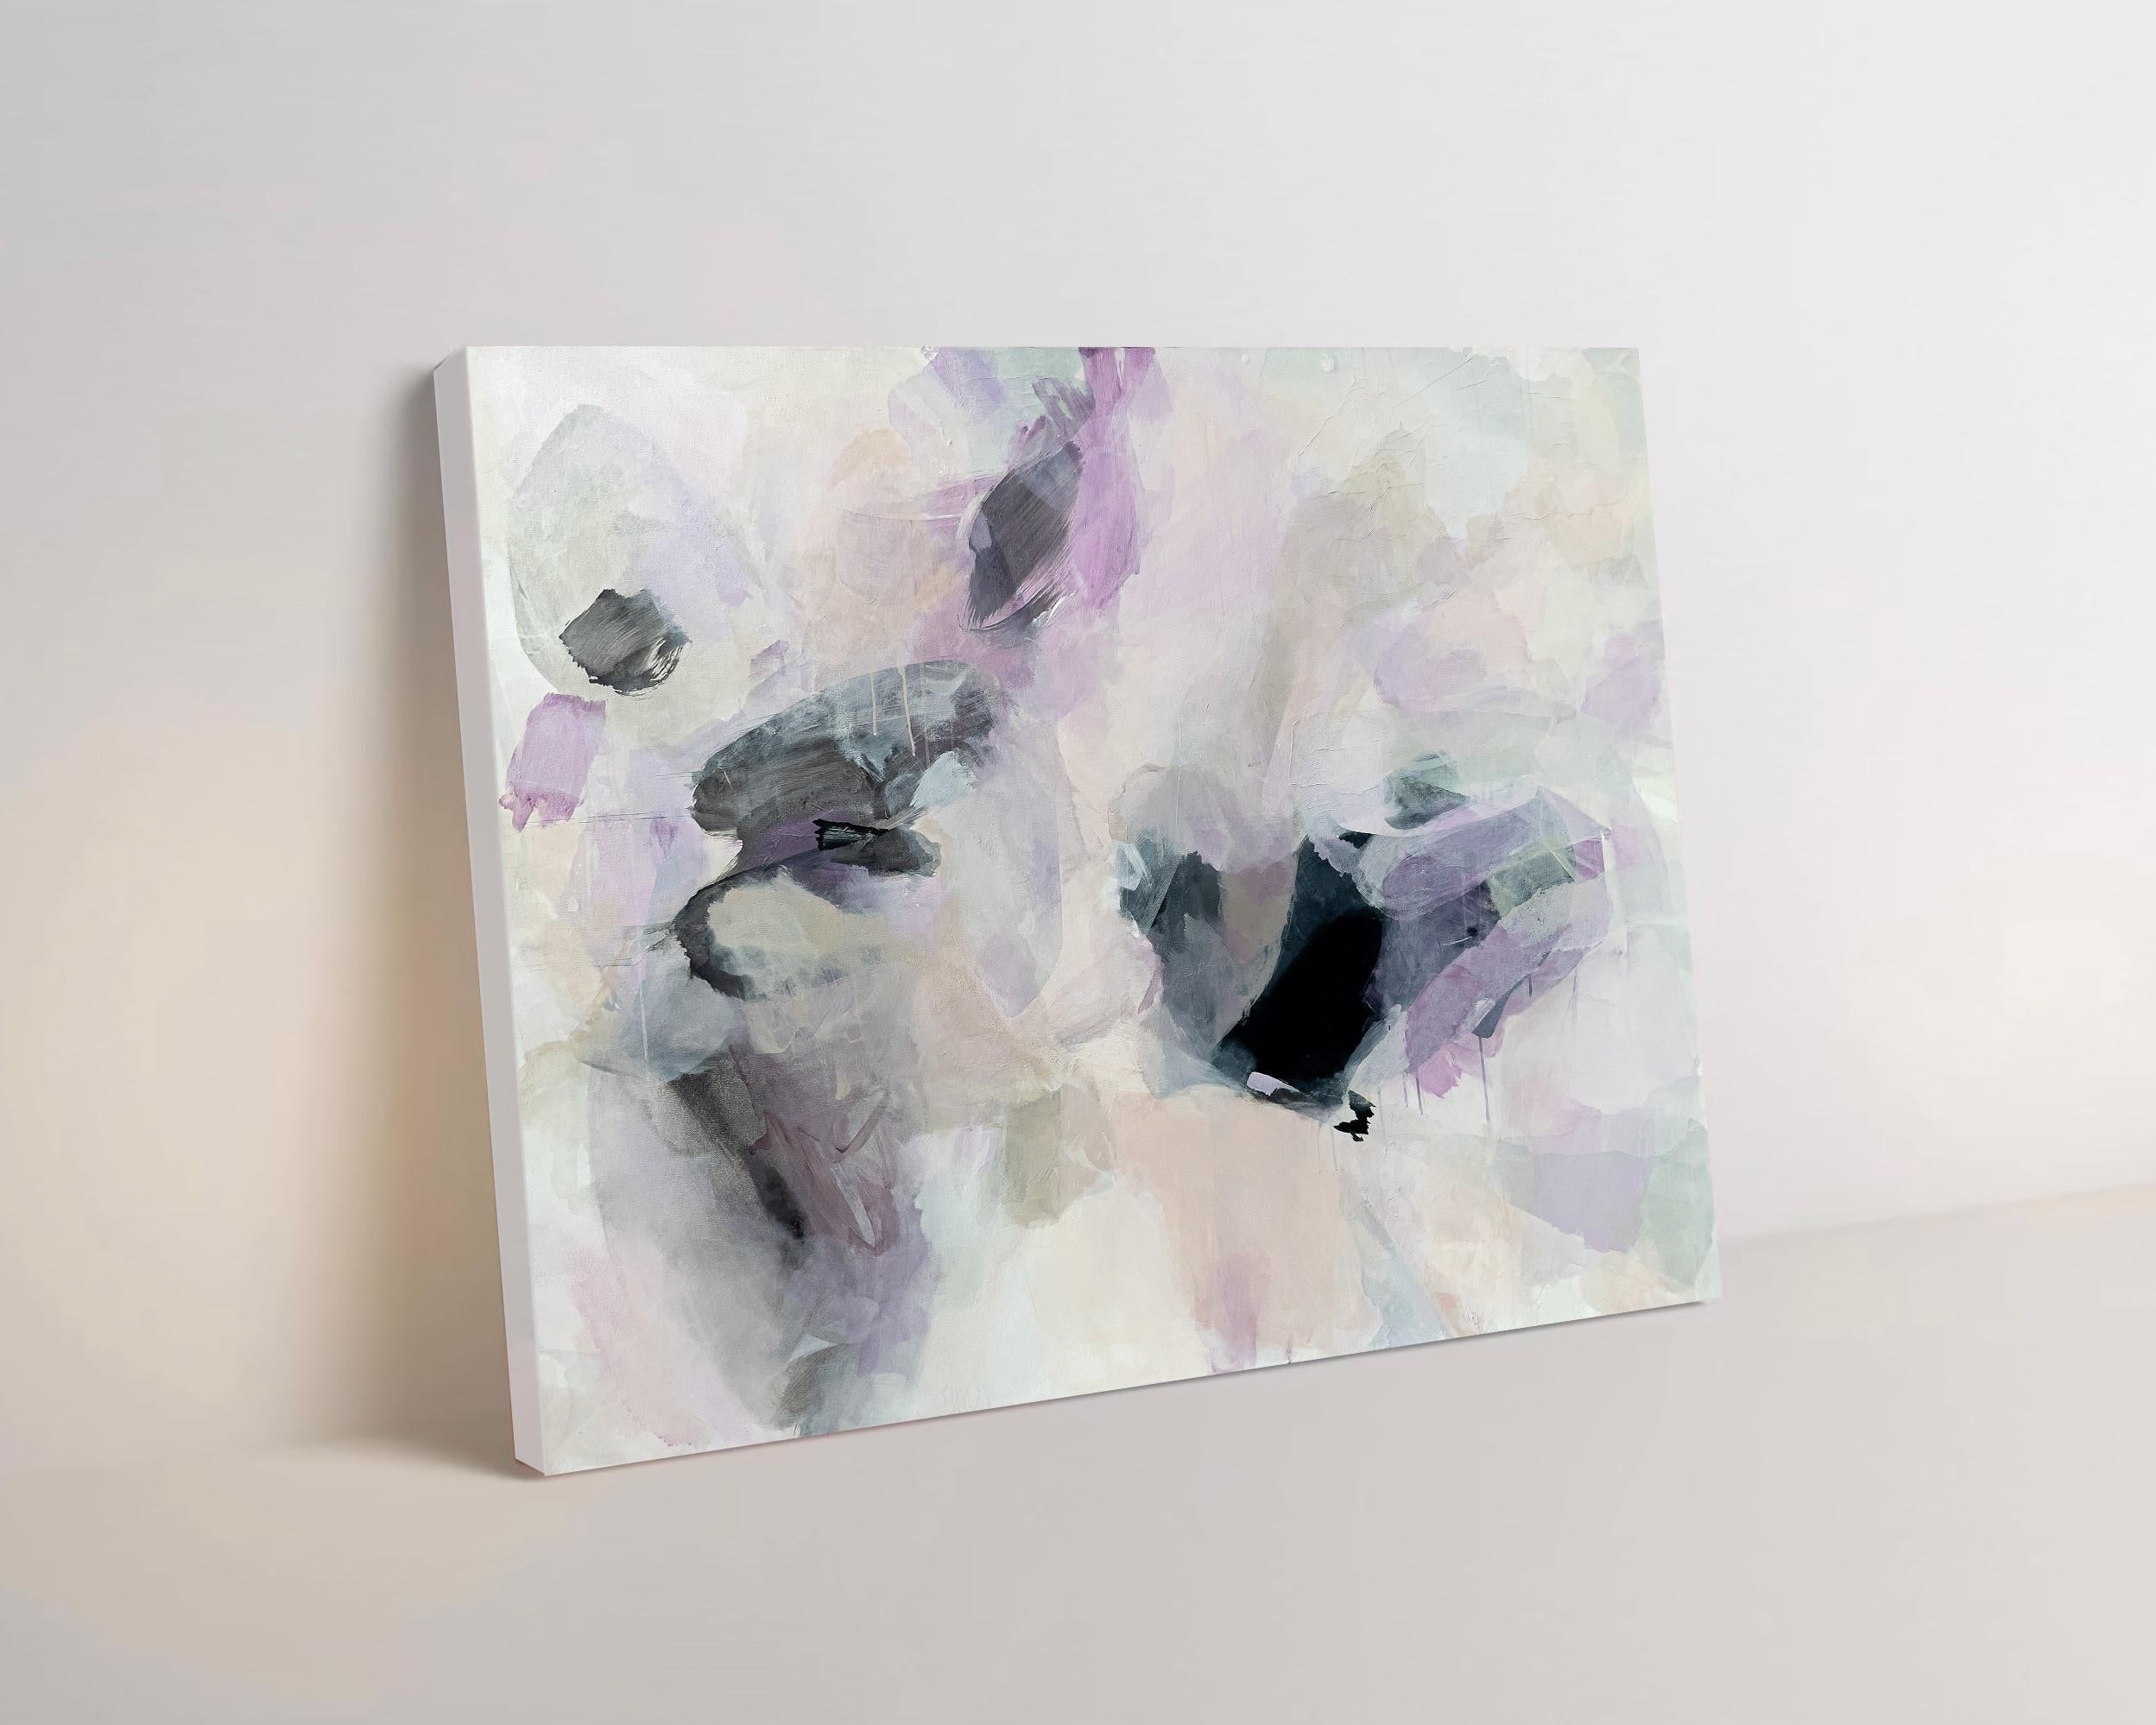 Your Flowers Have Faded, Original Contemporary Abstract Mixed Media Painting - Gray Landscape Painting by Stacey Warnix